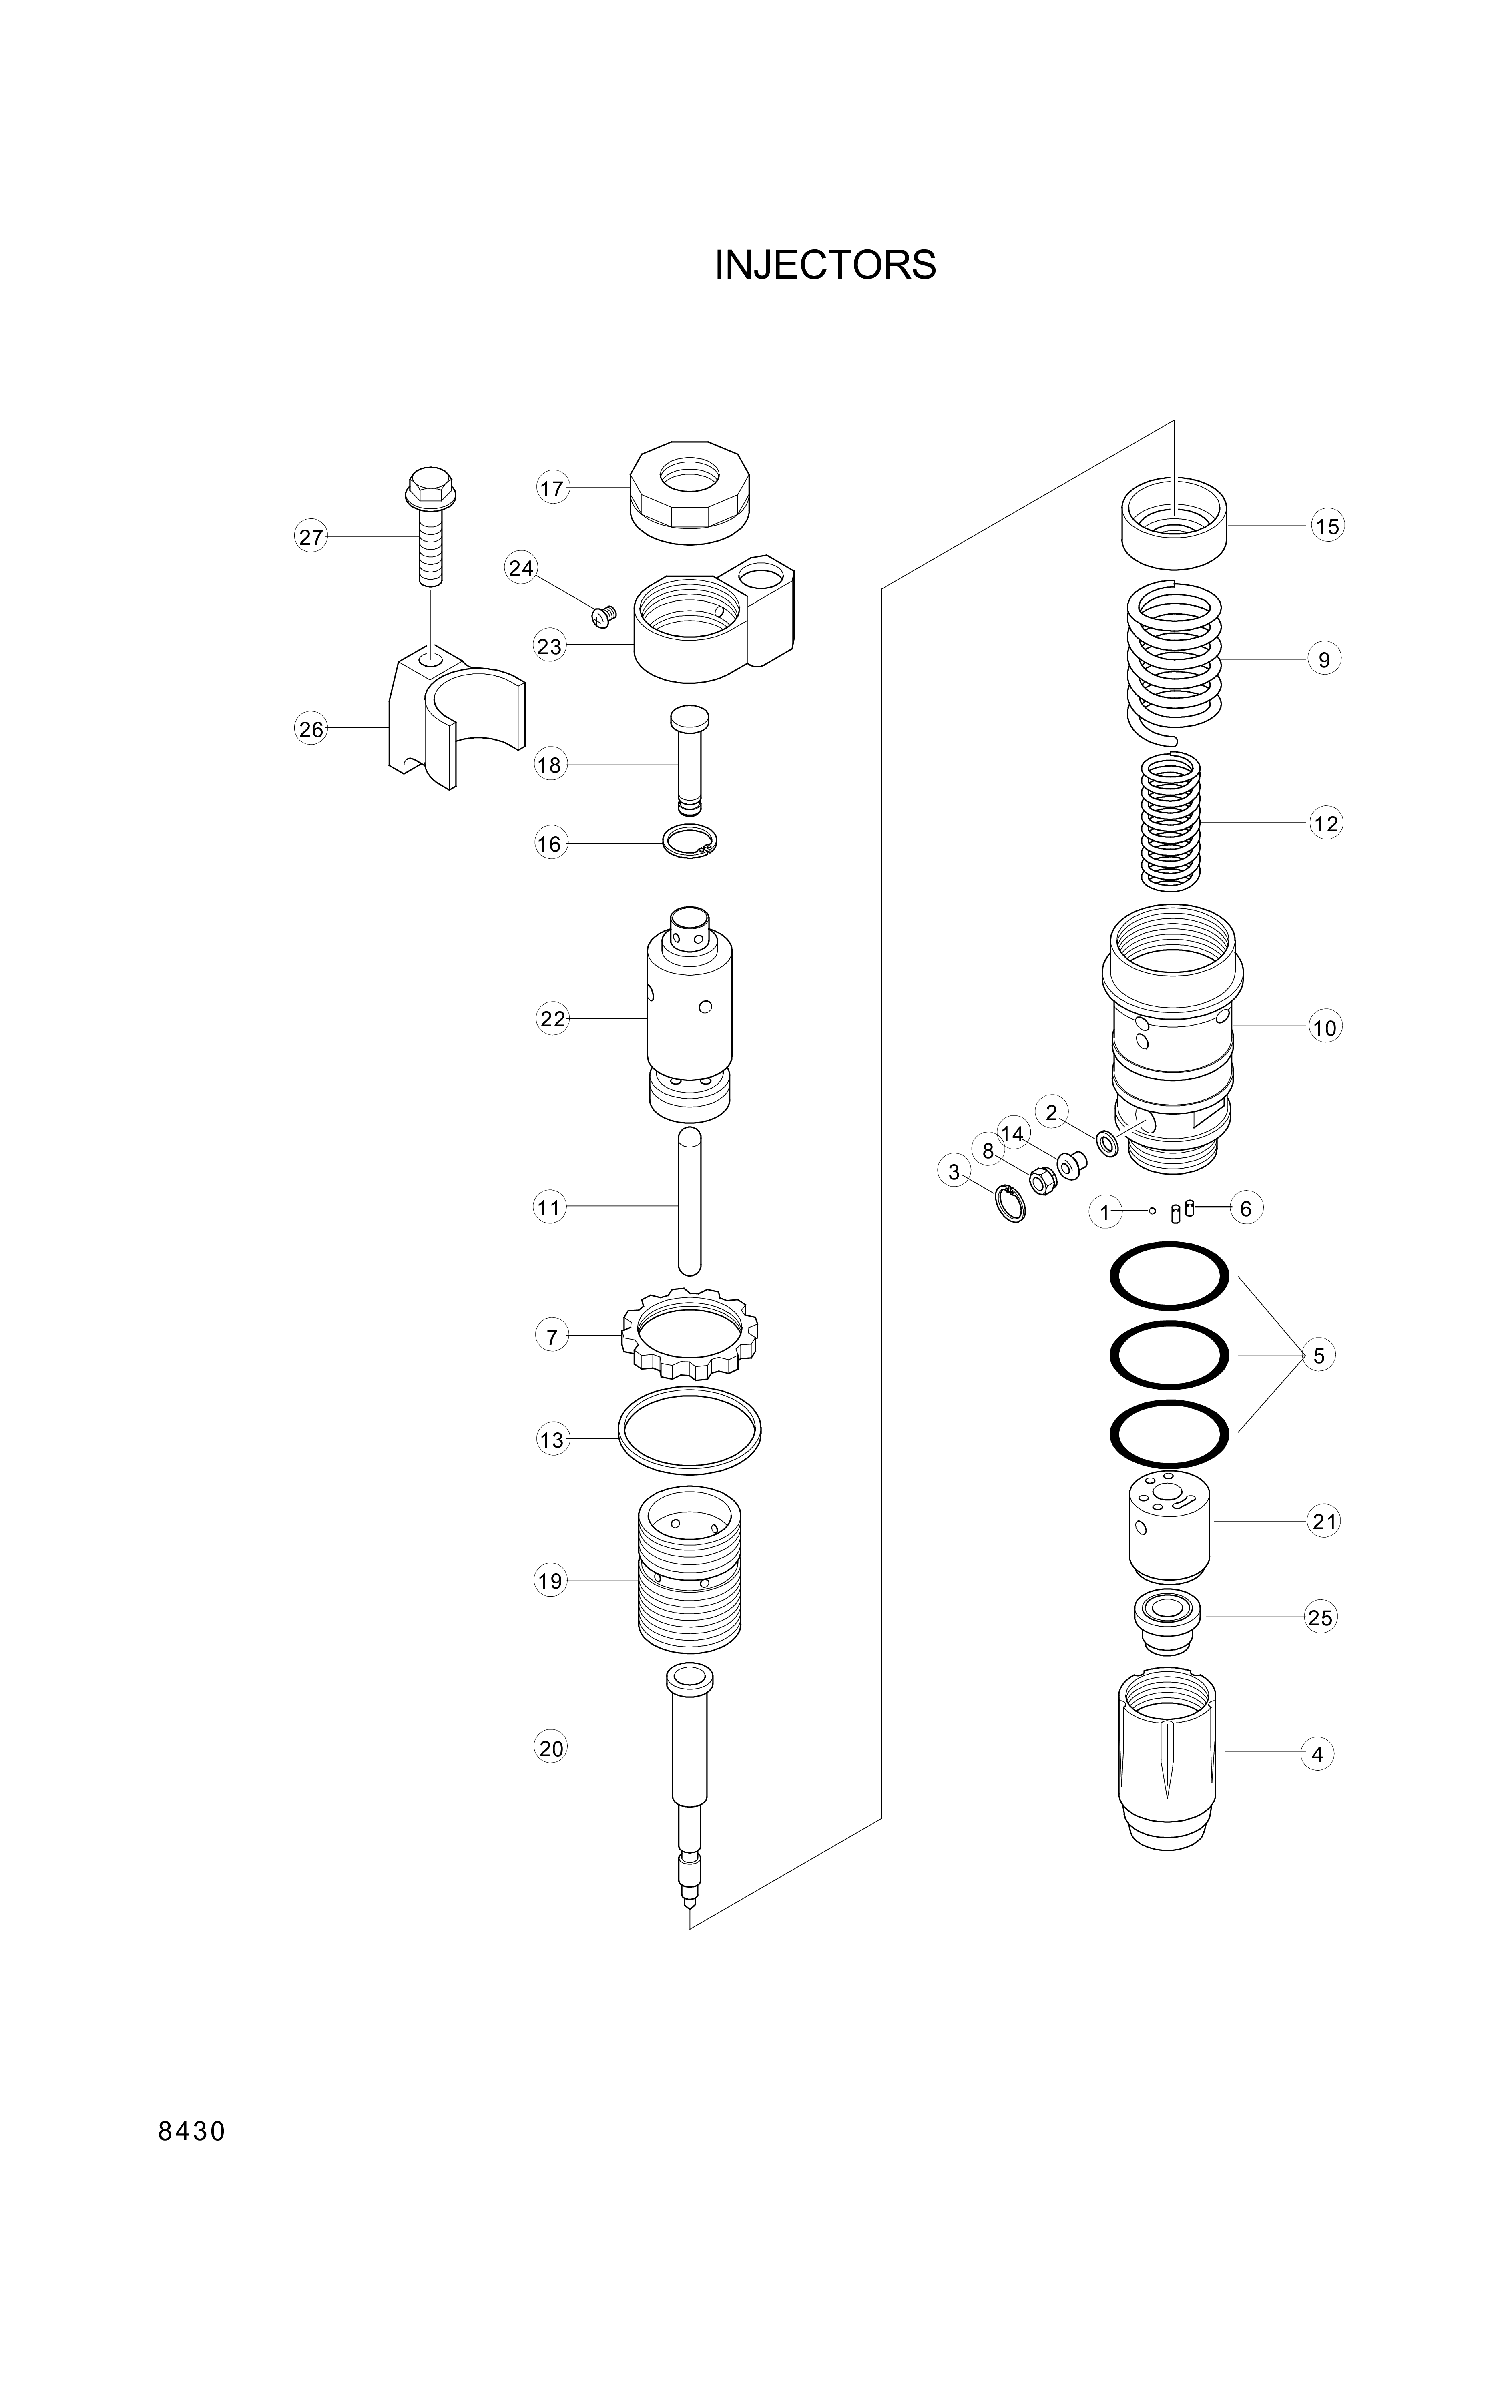 drawing for Hyundai Construction Equipment YUBP-05659 - CUP-INJECTOR (figure 2)